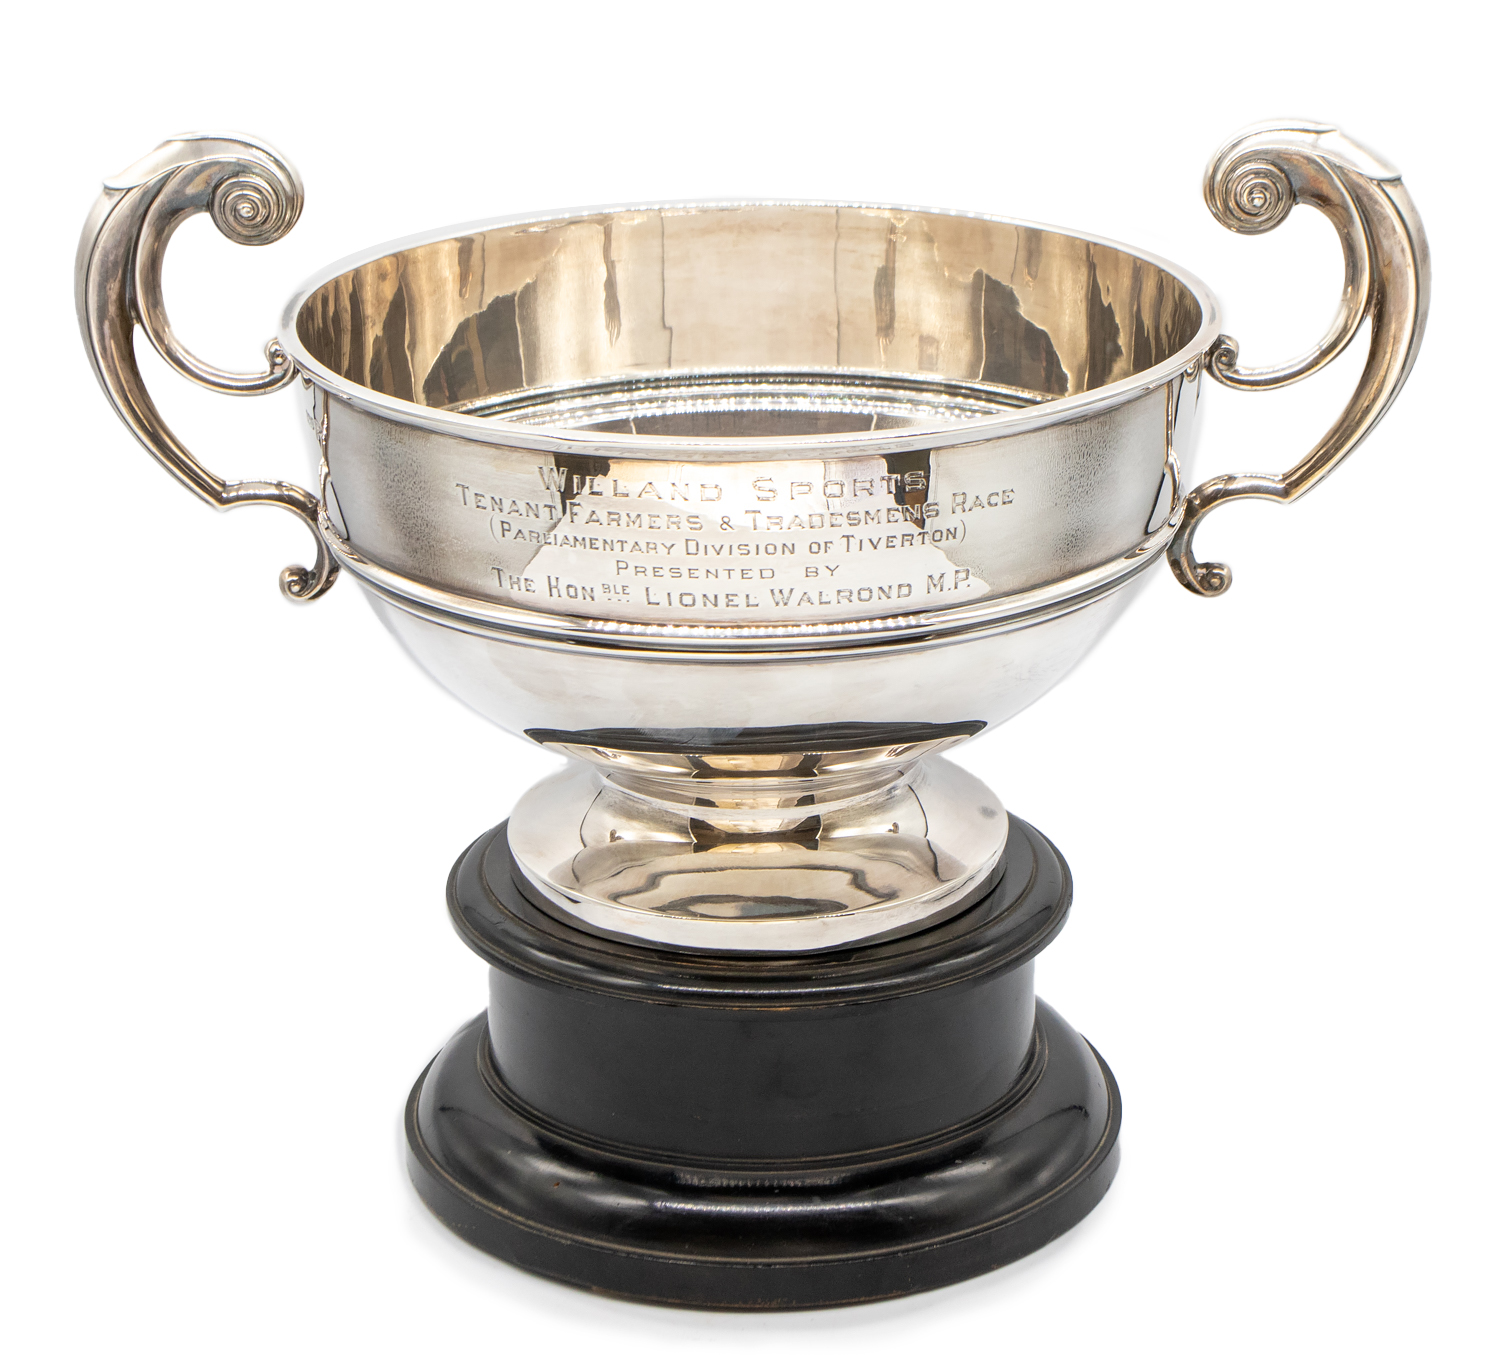 A large Edwardian silver twin handled presentation bowl, on circular footed base, engraved "